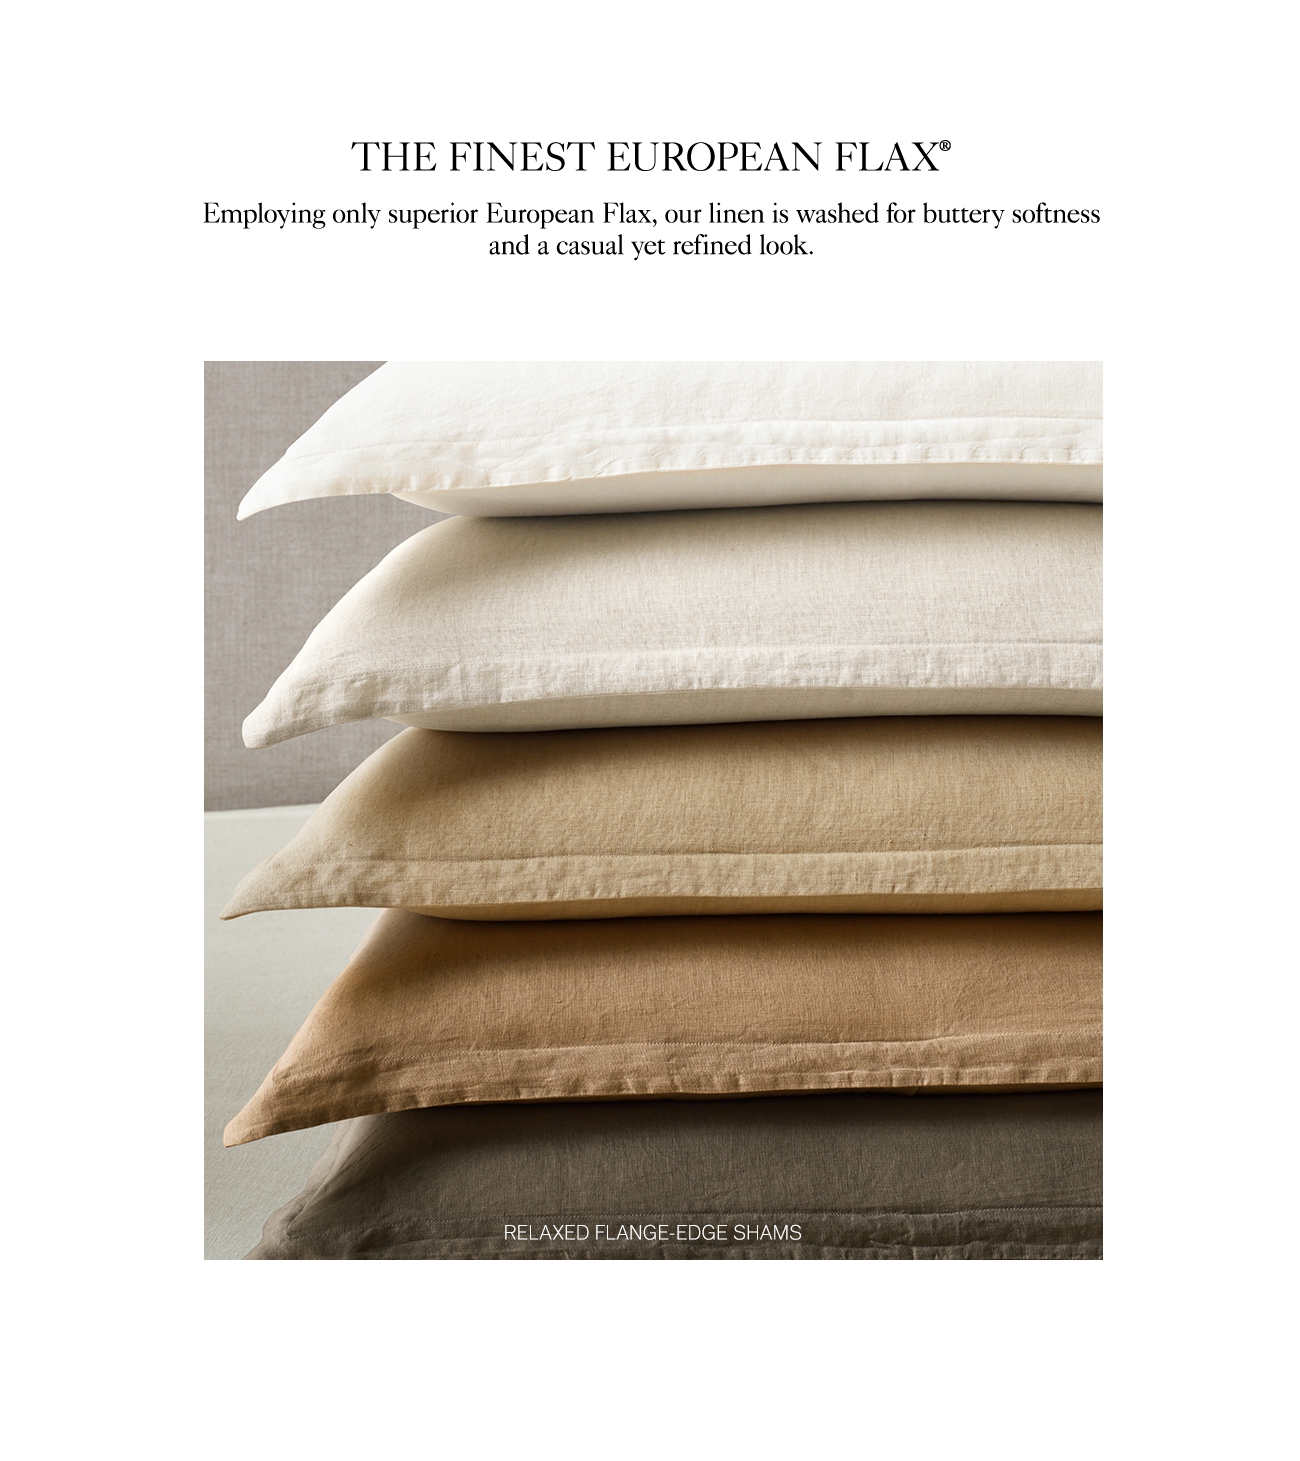 THE FINEST EUROPEAN FLAX Employing only superior European Flax, our linen is washed for buttery softness and a casual yet refined look. KED FLANGE-EI 